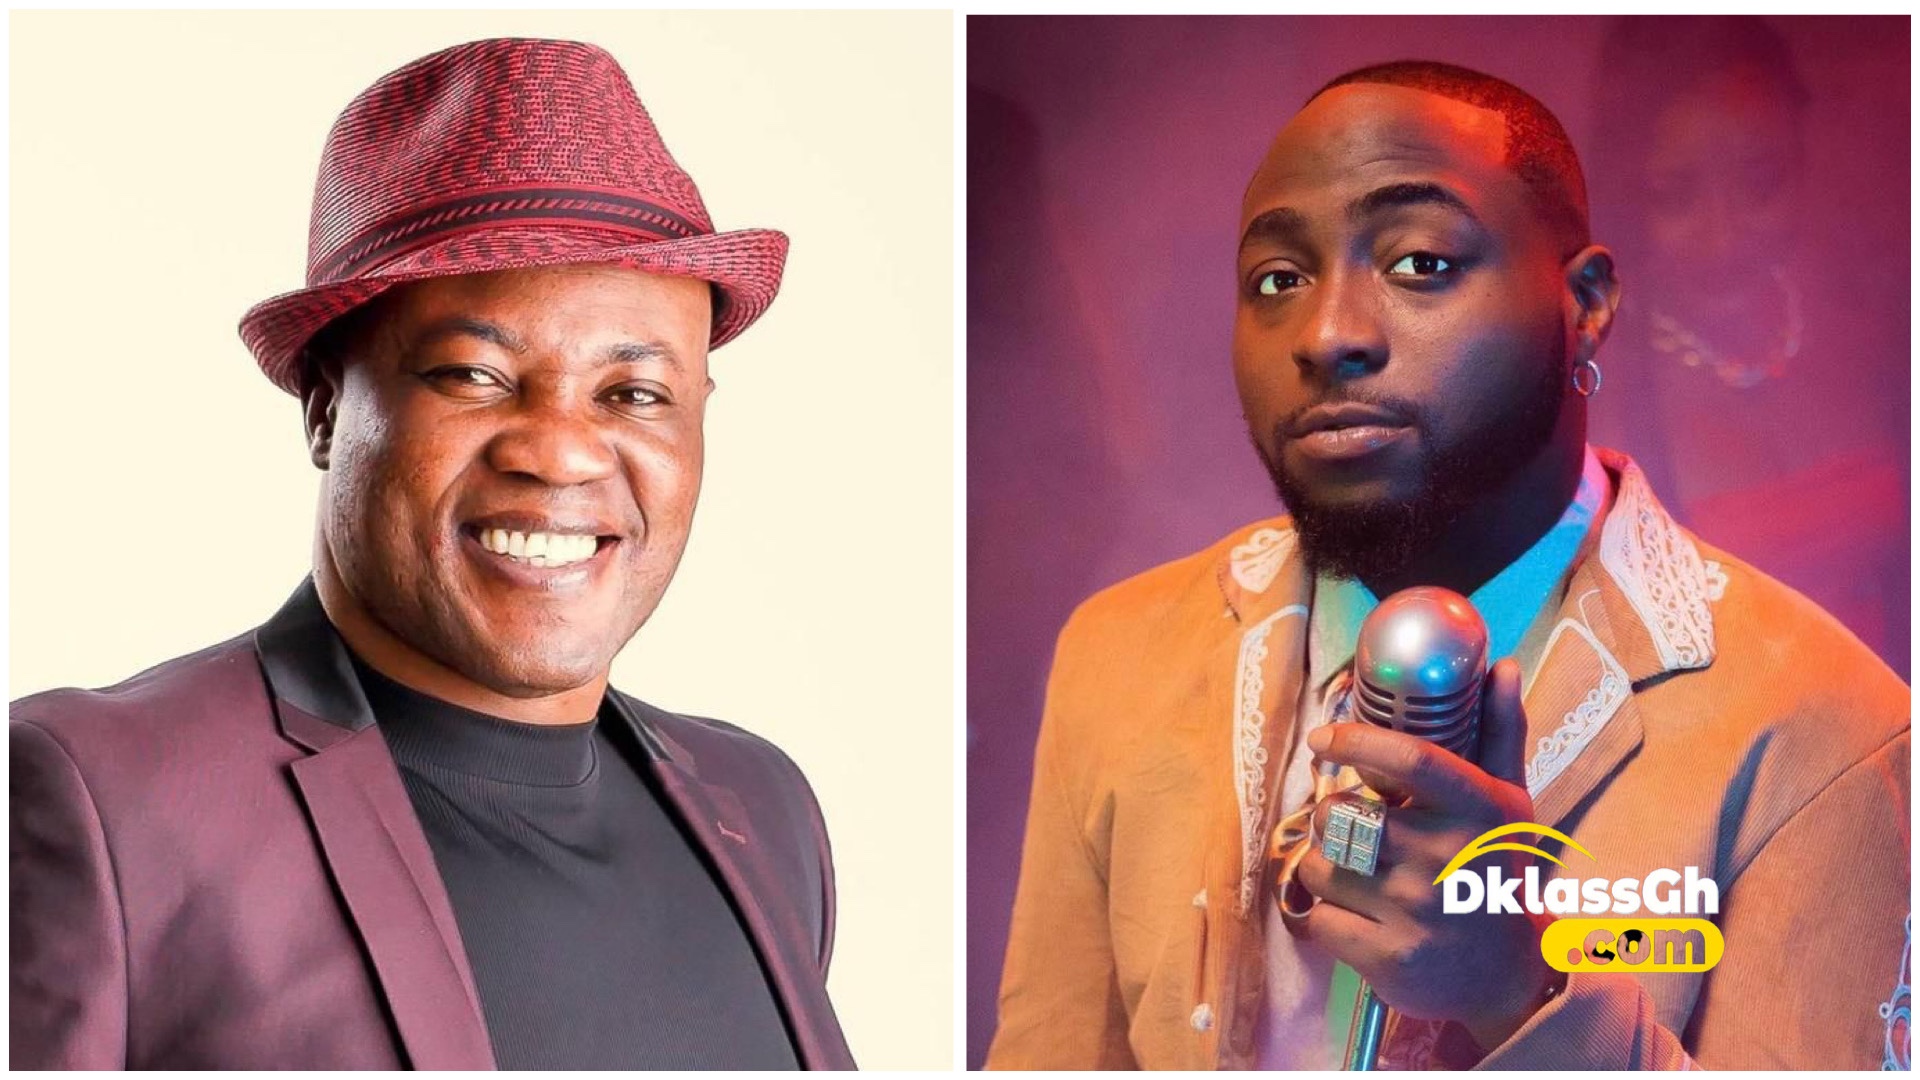 I saw Davido Paying a Dj in a NightClub to play his songs - Mr Music Mensah Claims (Video)